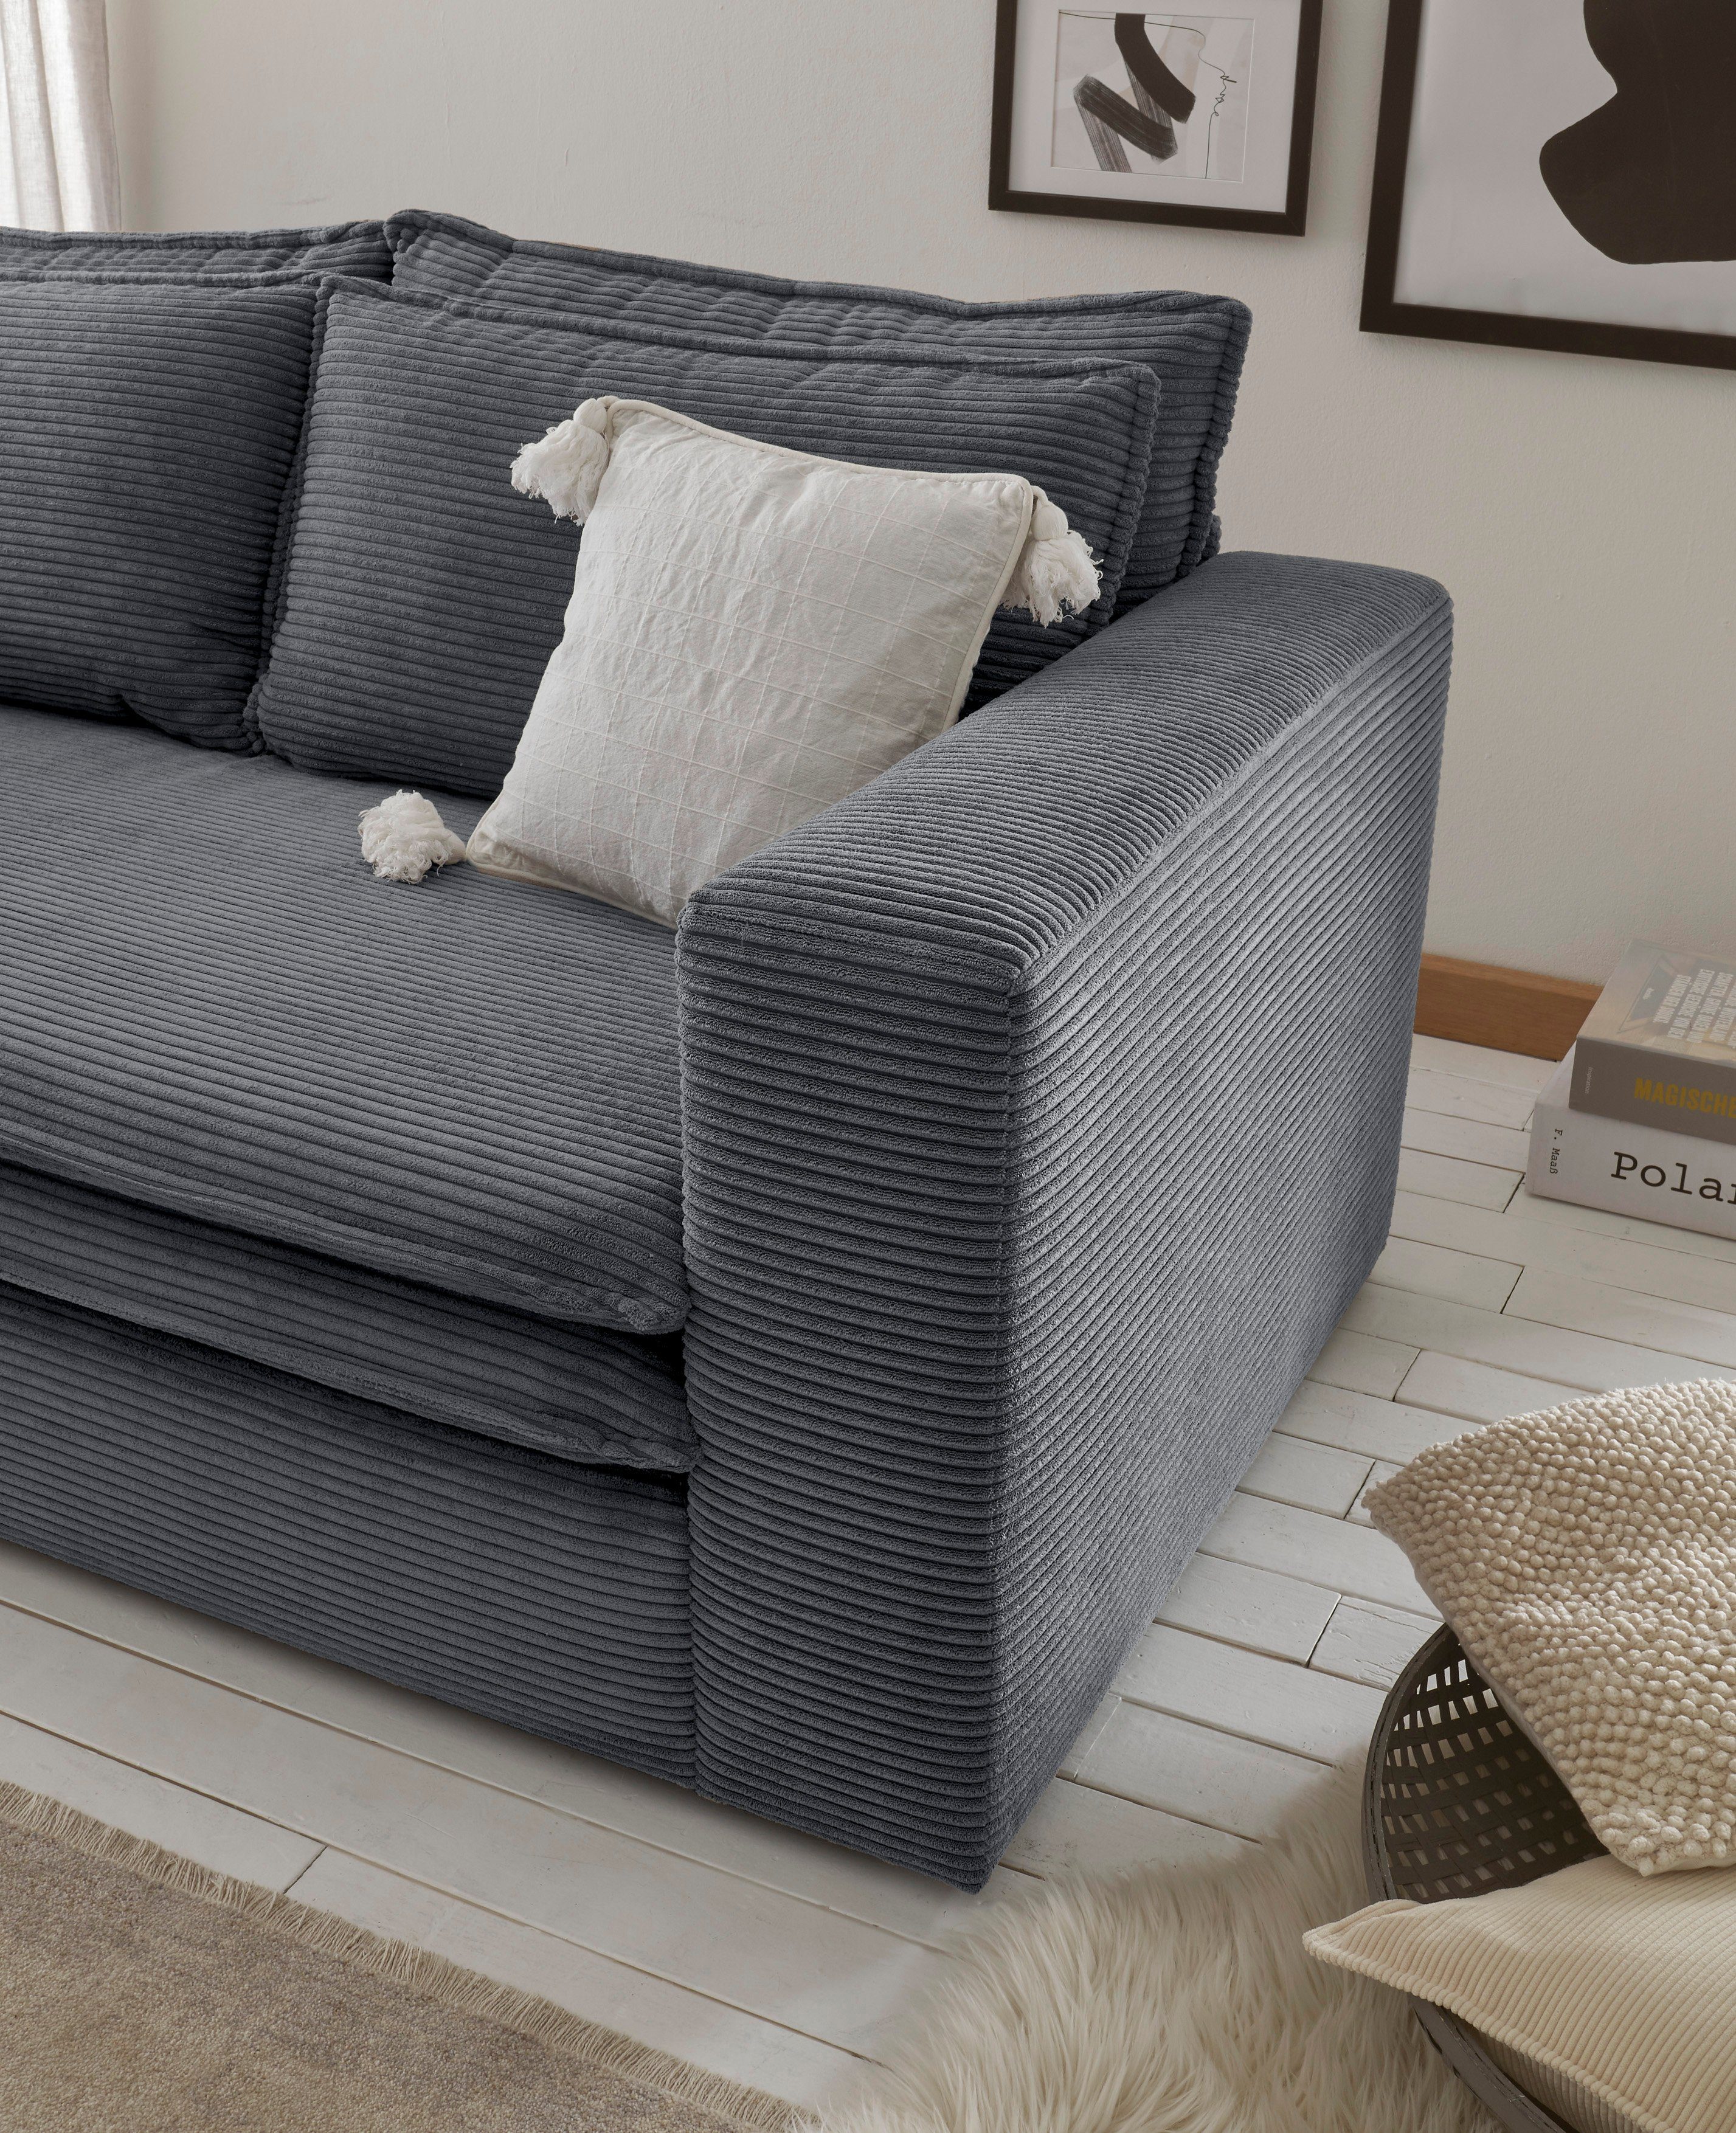 Places of Style Loveseat PIAGGE, Cord, Hochwertiger Loveseat Anthrazit trendiger